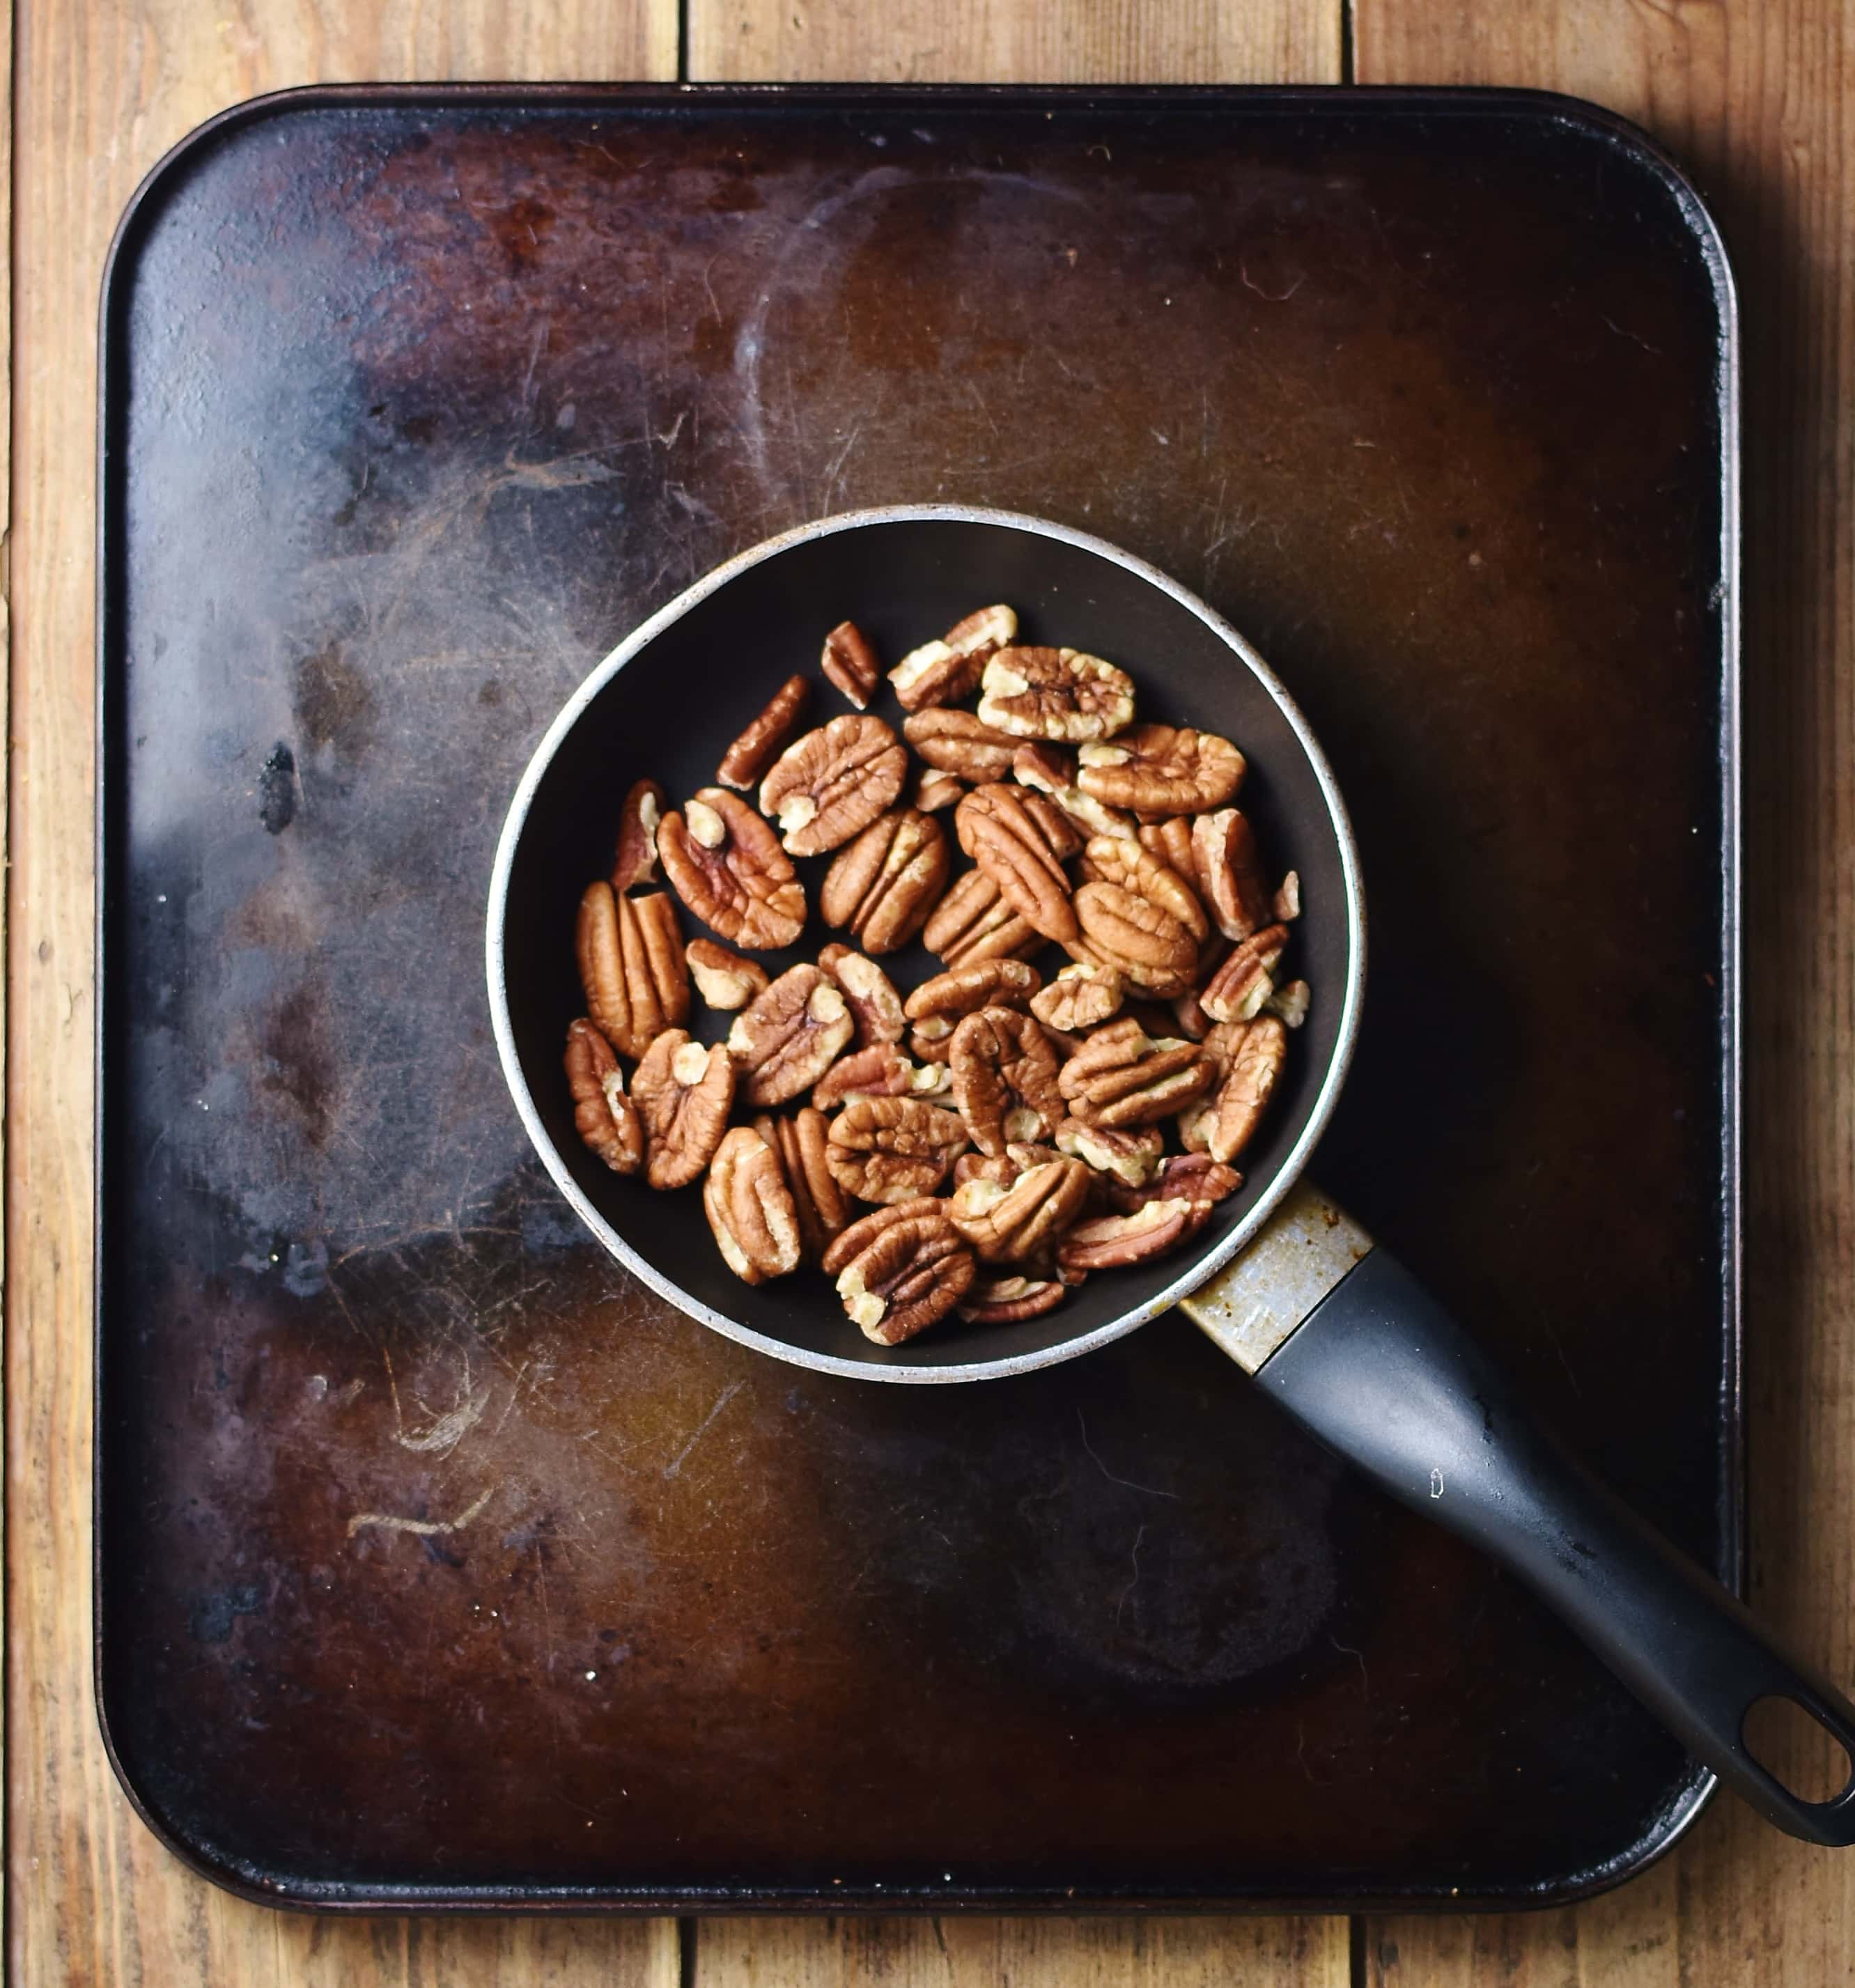 Top down view of pecans in small pan.